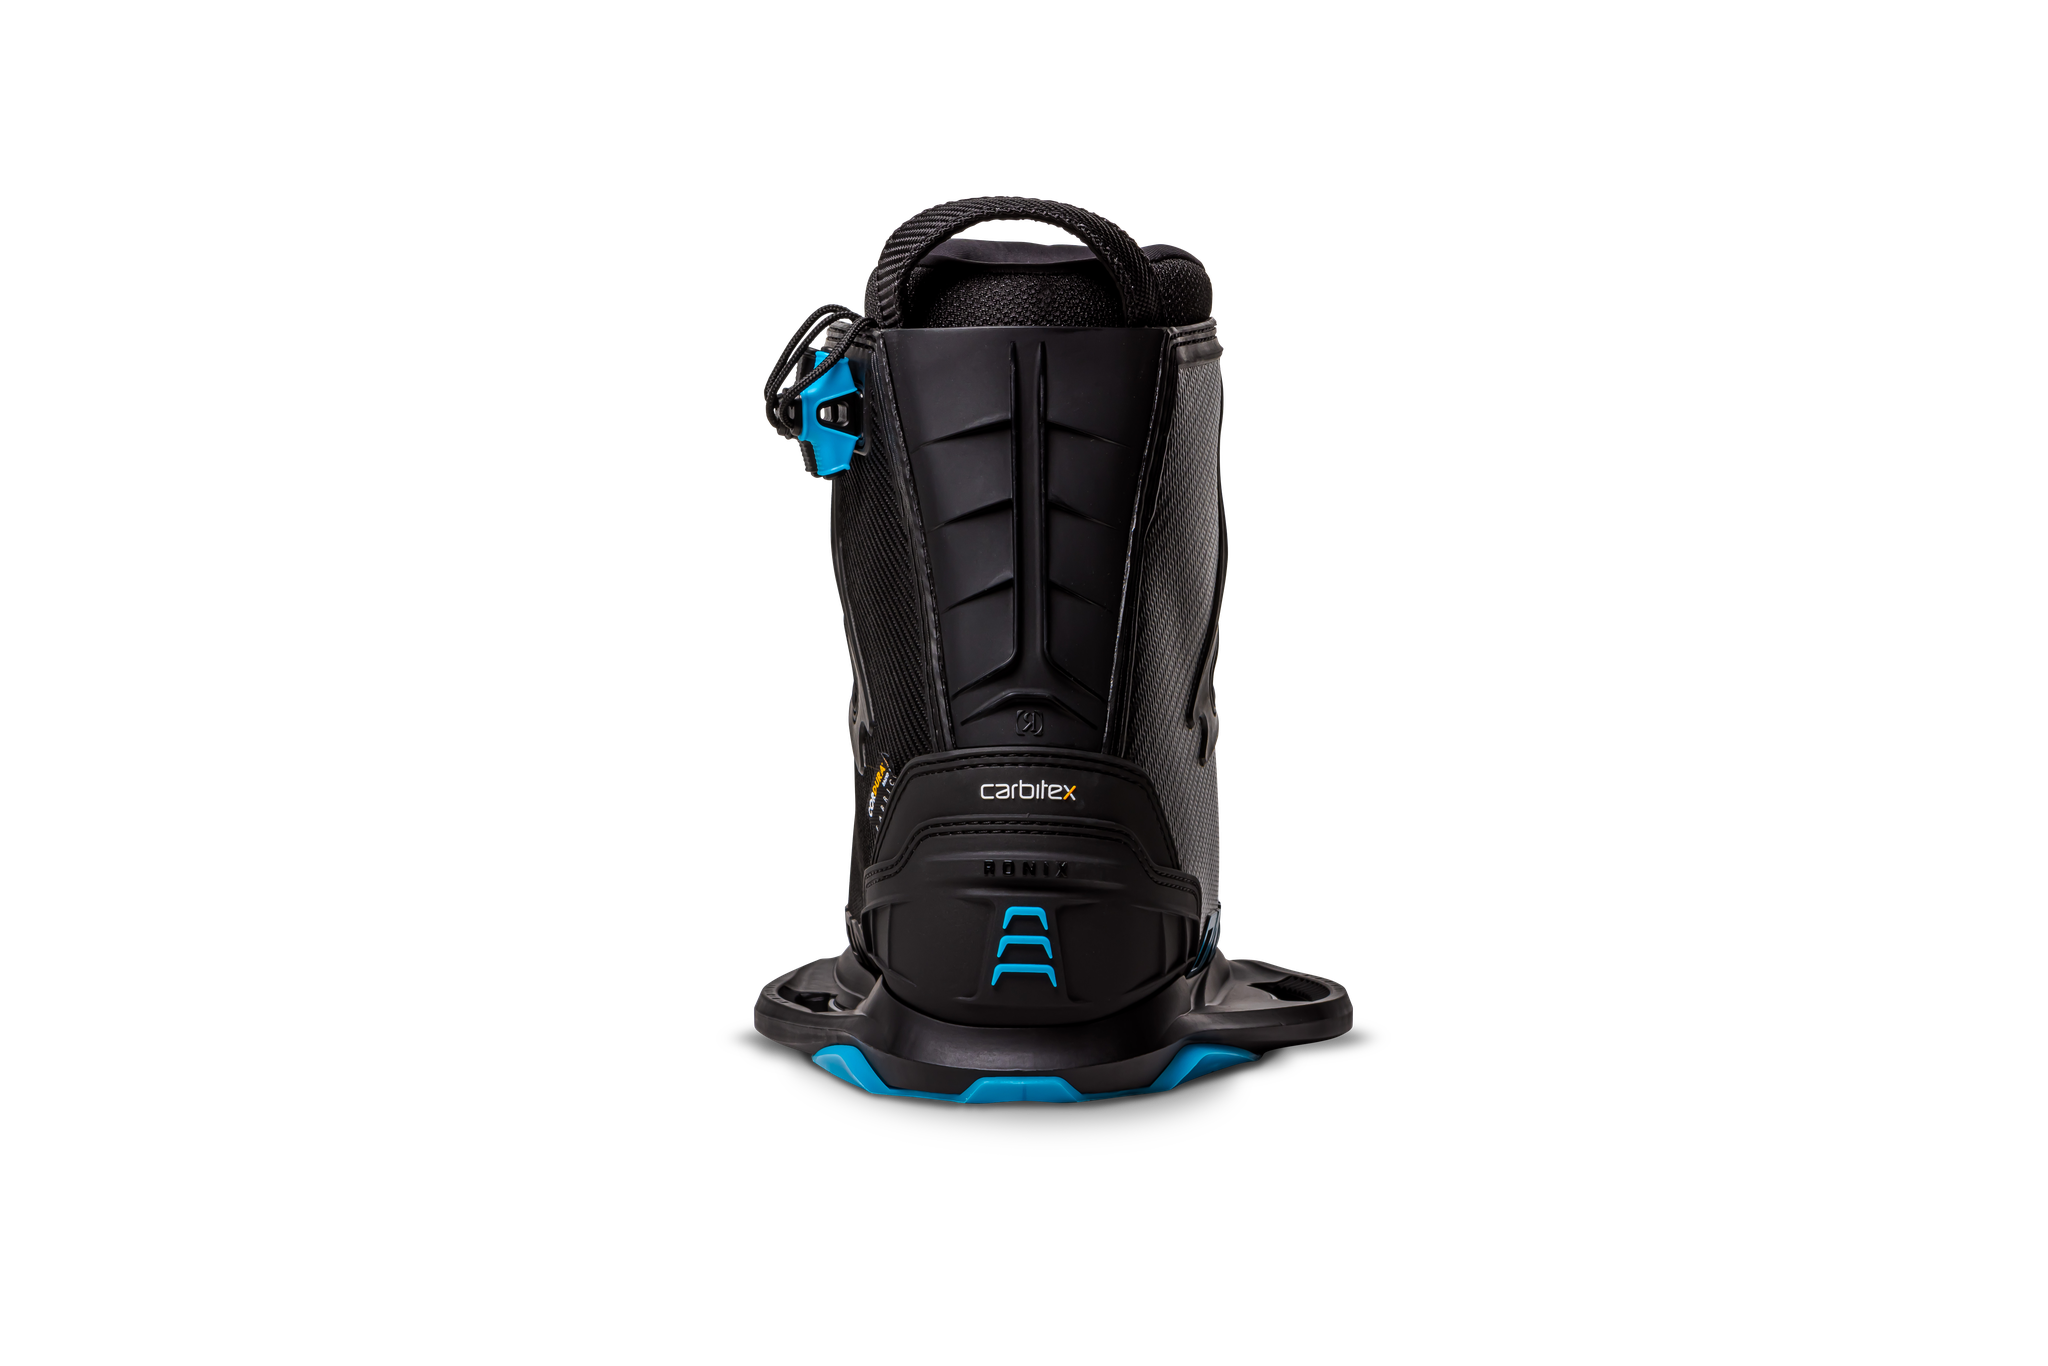 A responsive Ronix 2023 One Carbitex boot with an Intuition+ heat moldable liner on a black background.